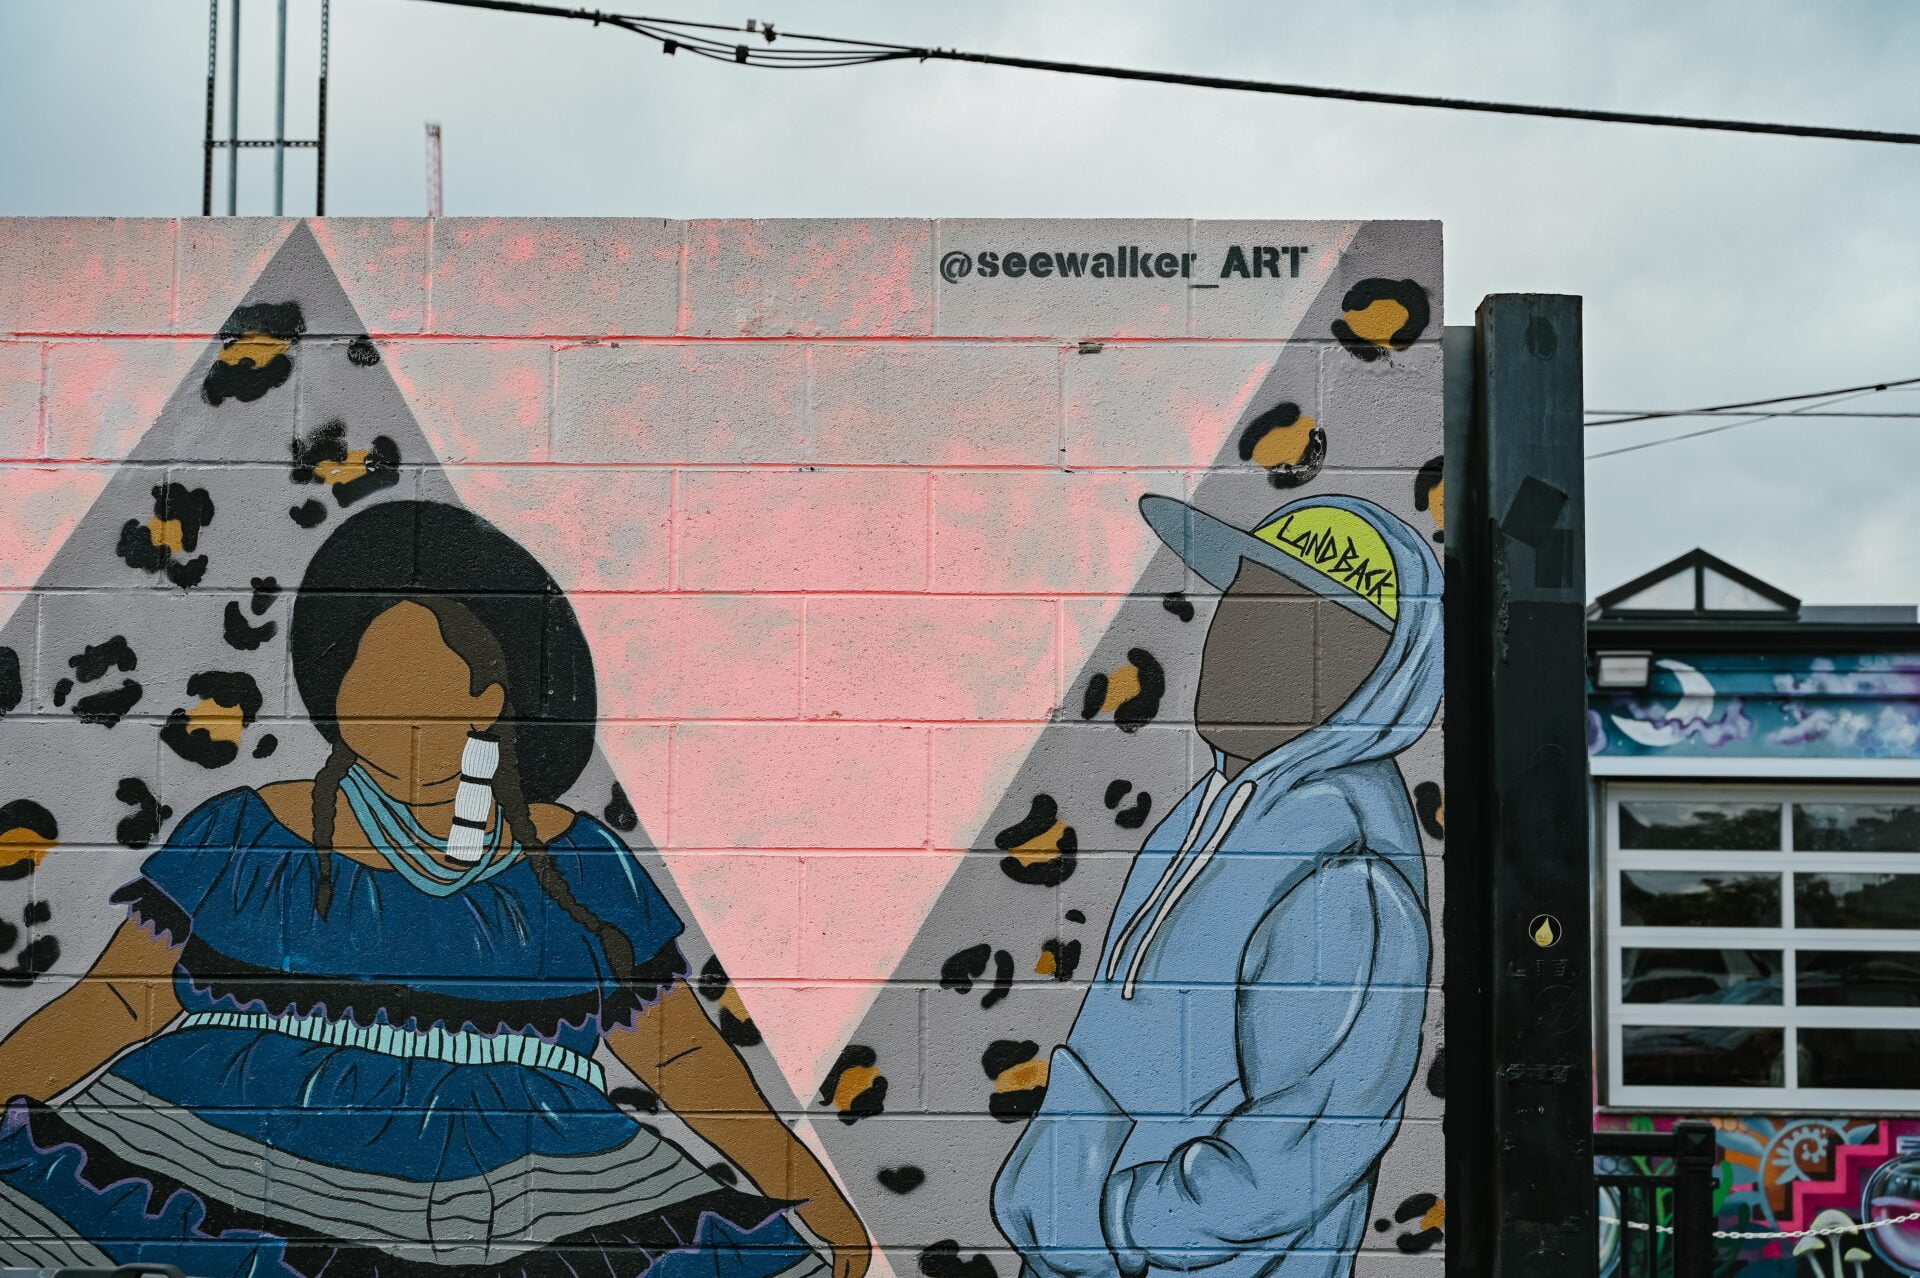 mural of two people